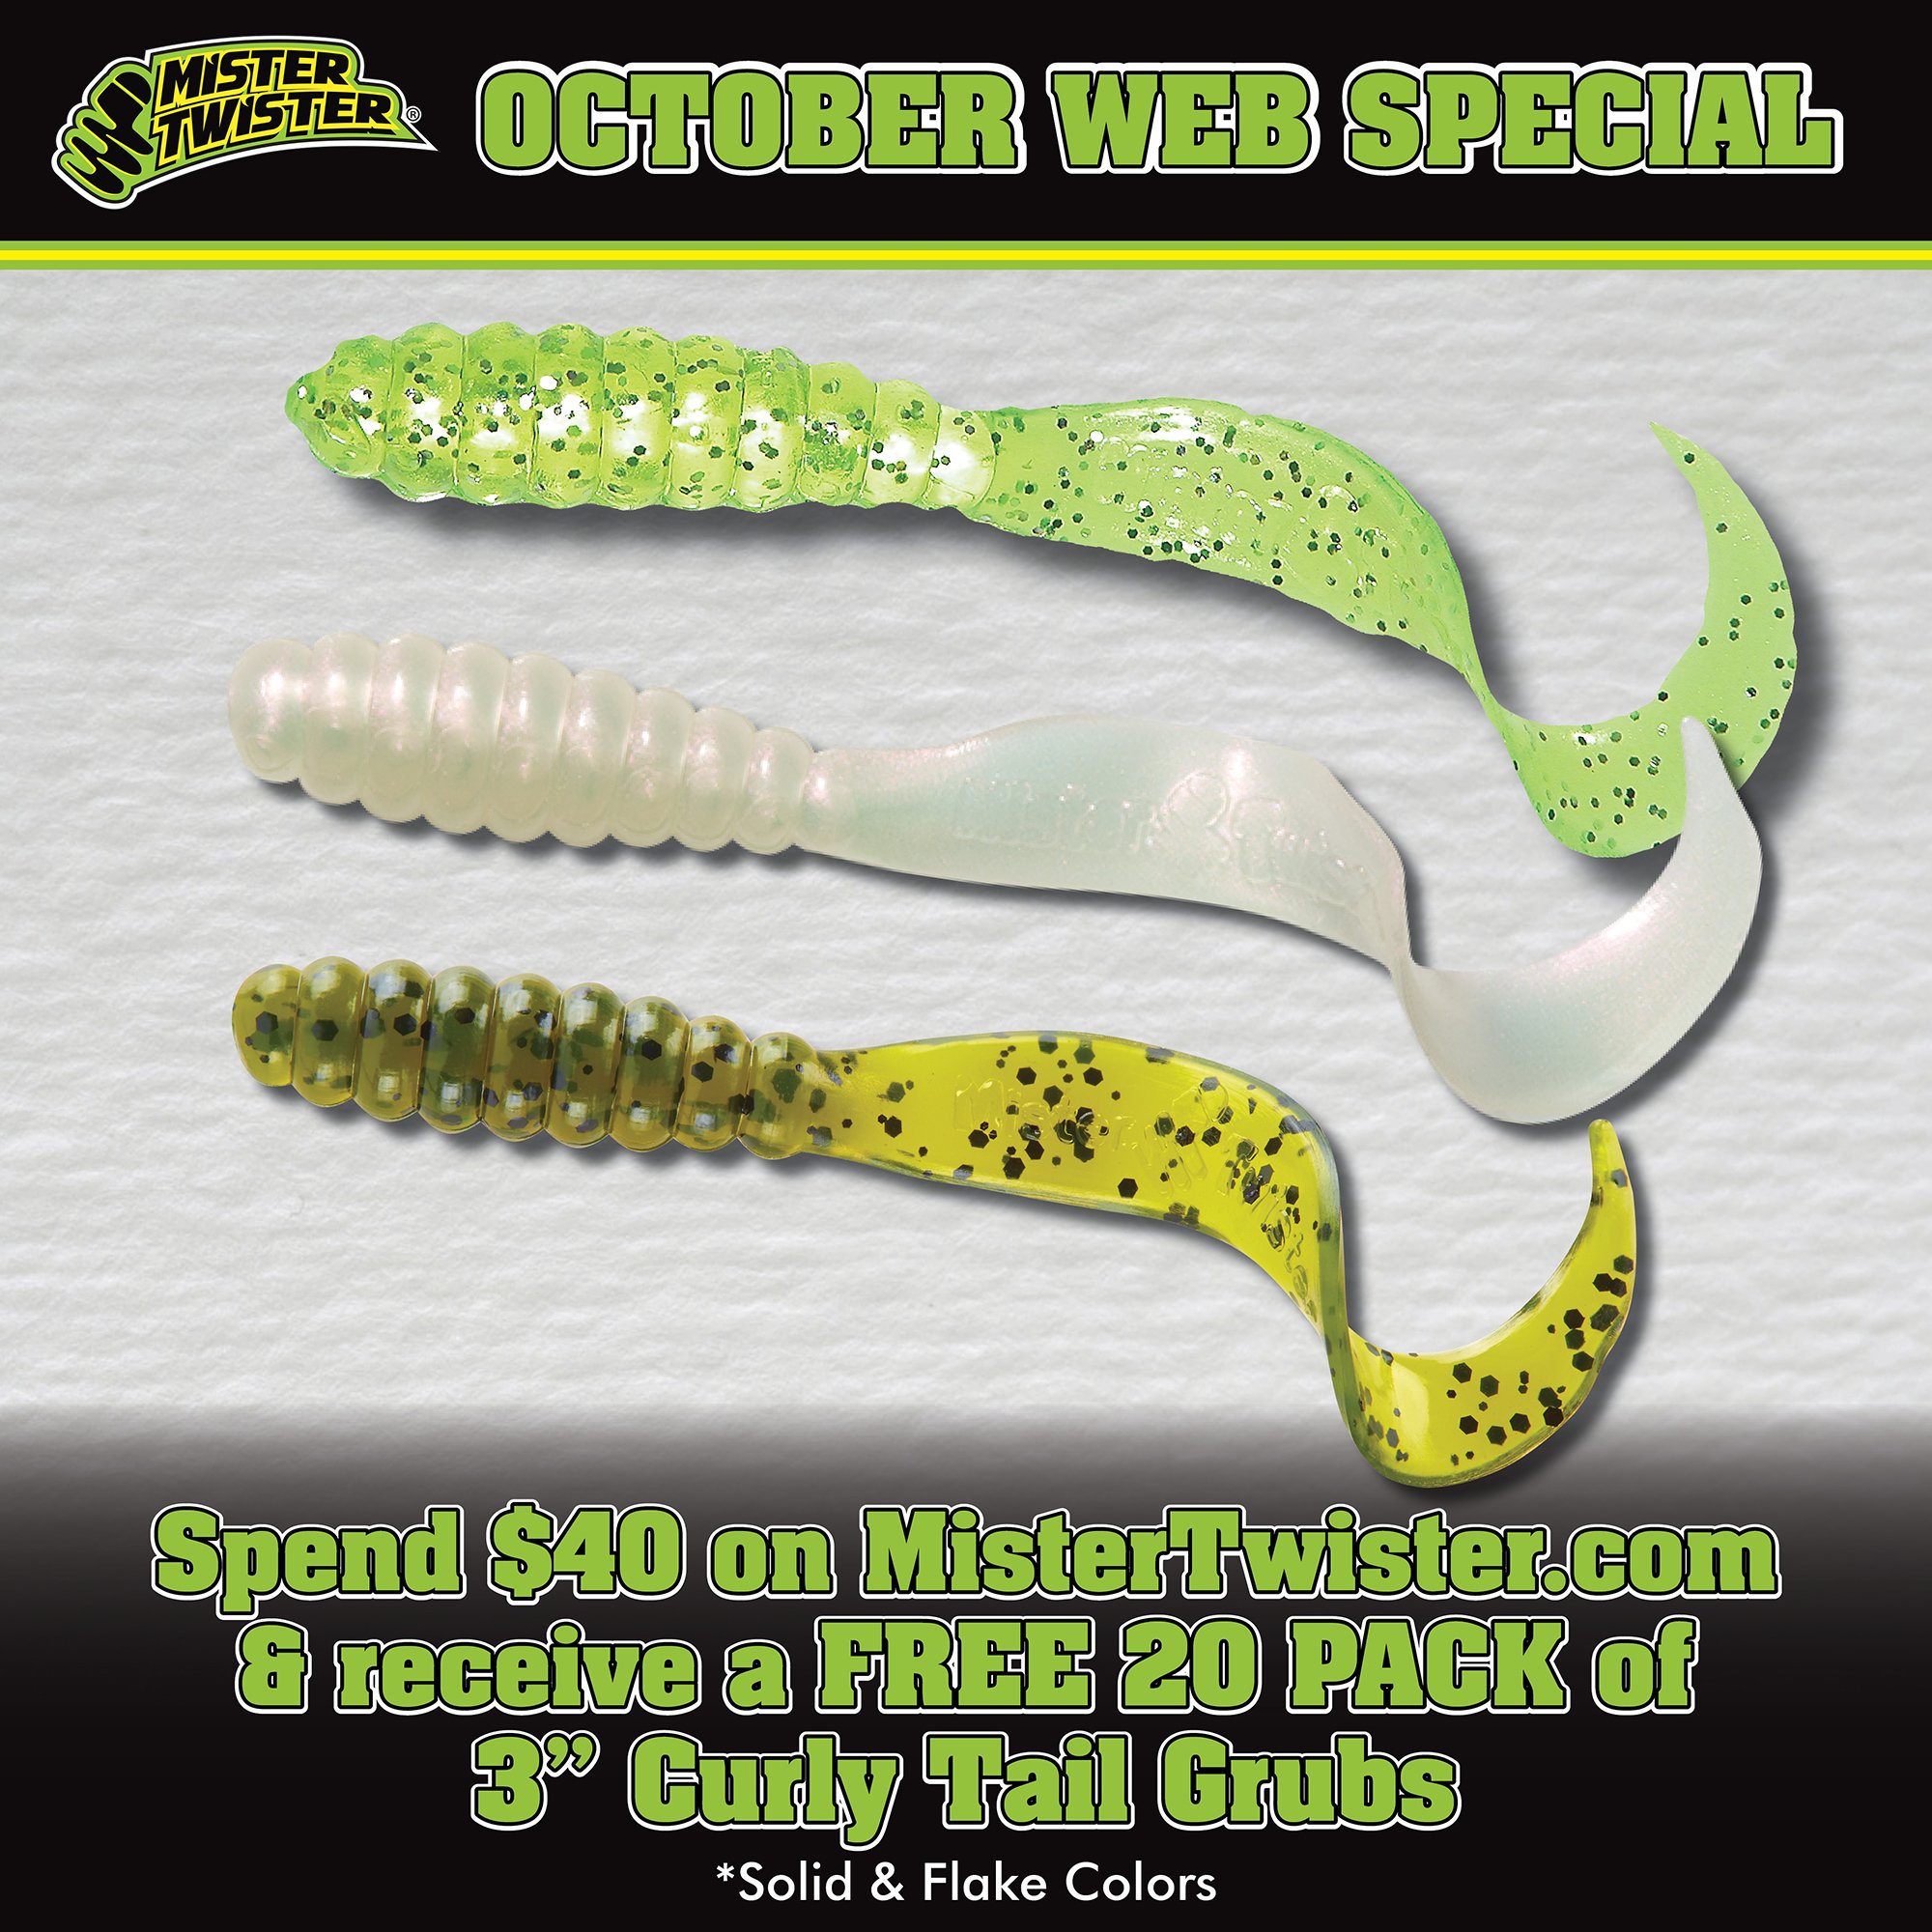 Mister Twister on X: Oct web special is now live! Spend $40 on